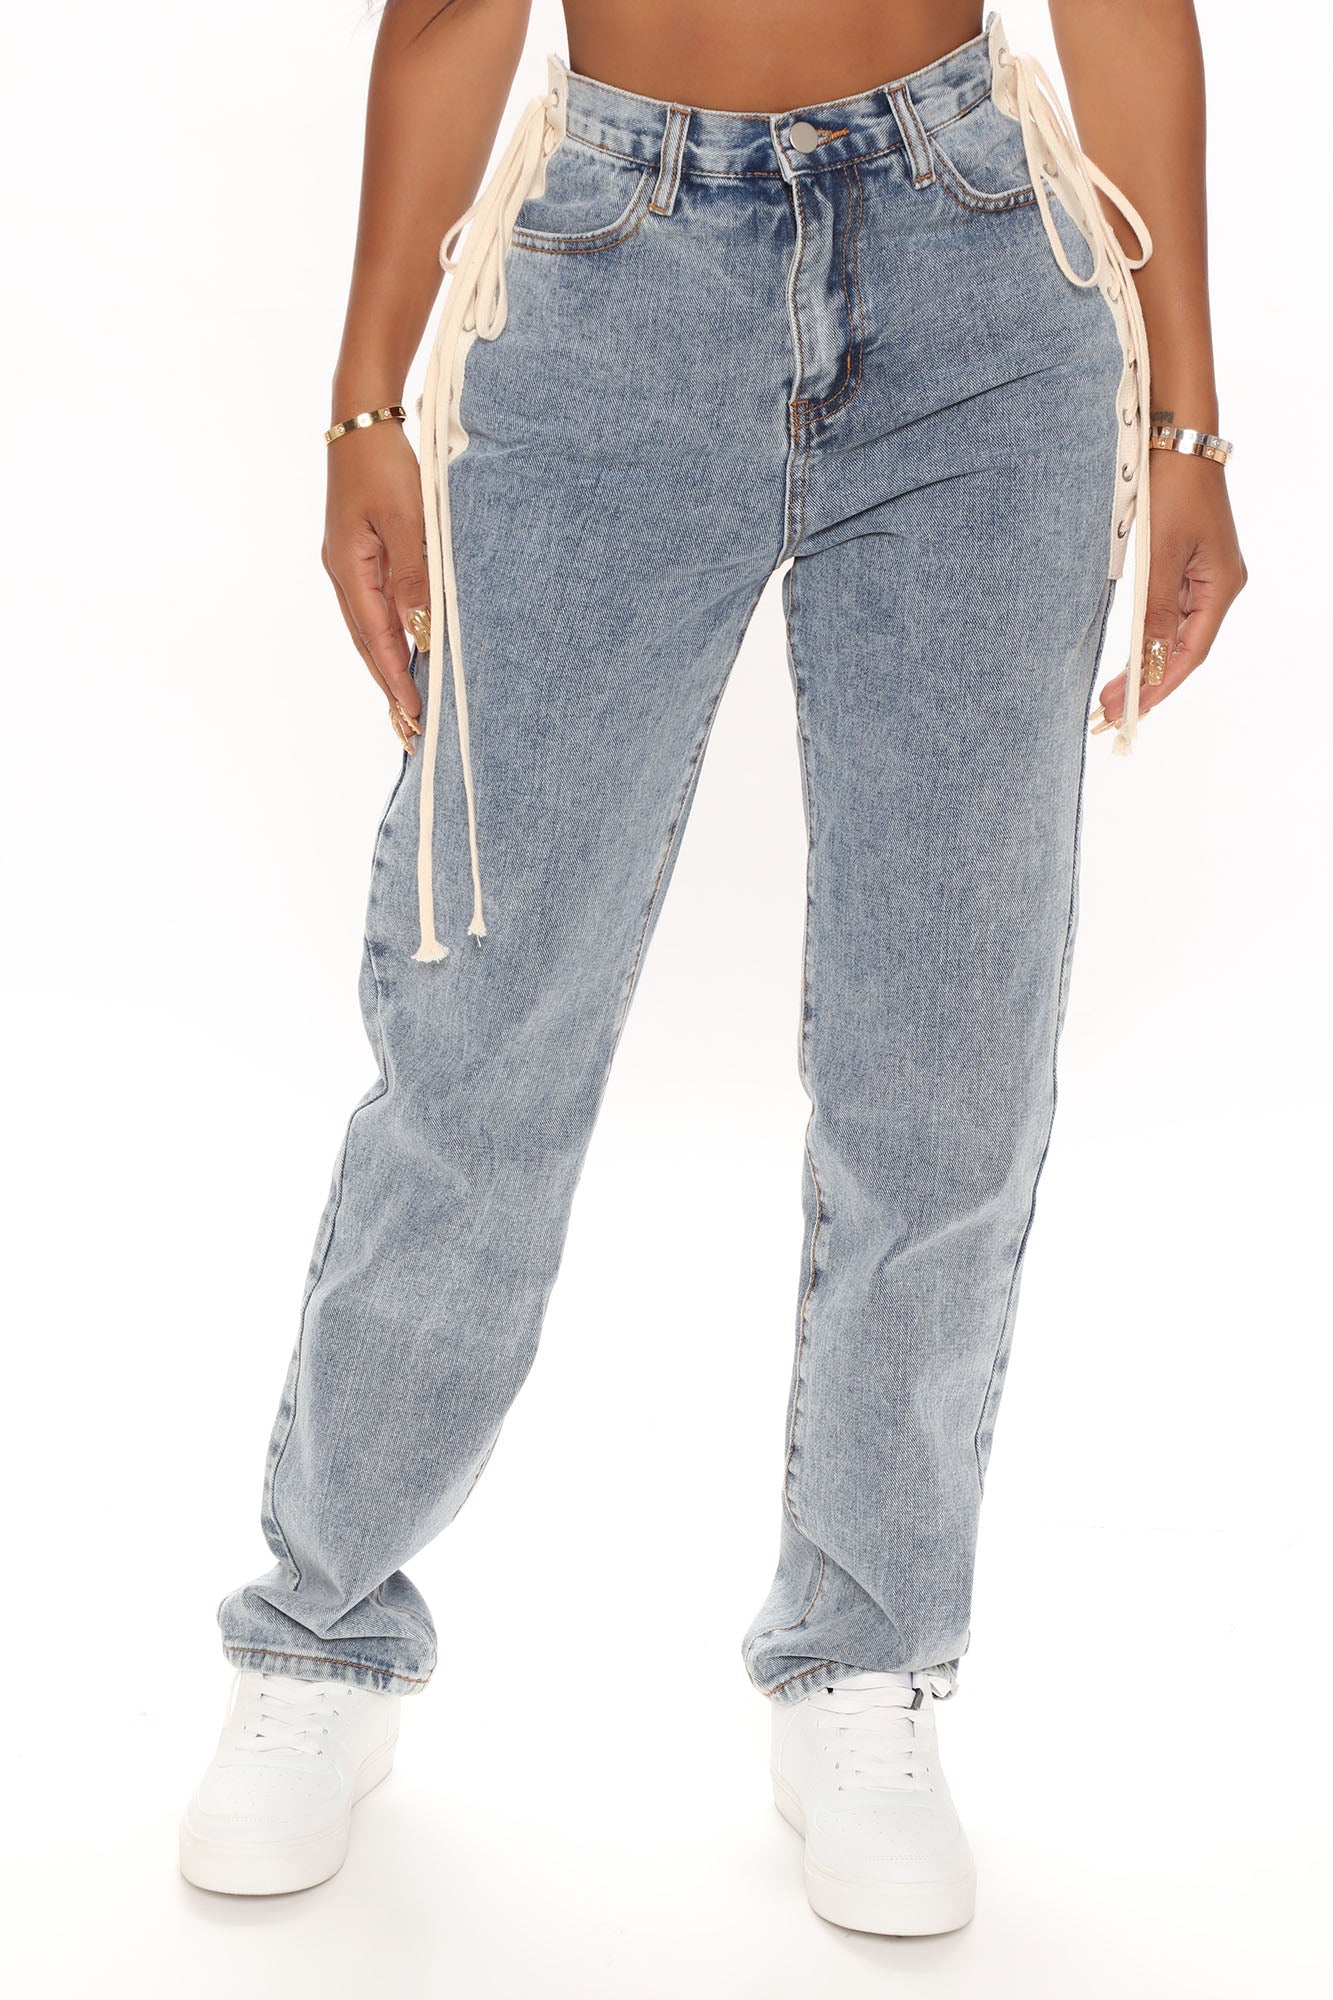 Lace Waist Jeans - Mid Grey Wash